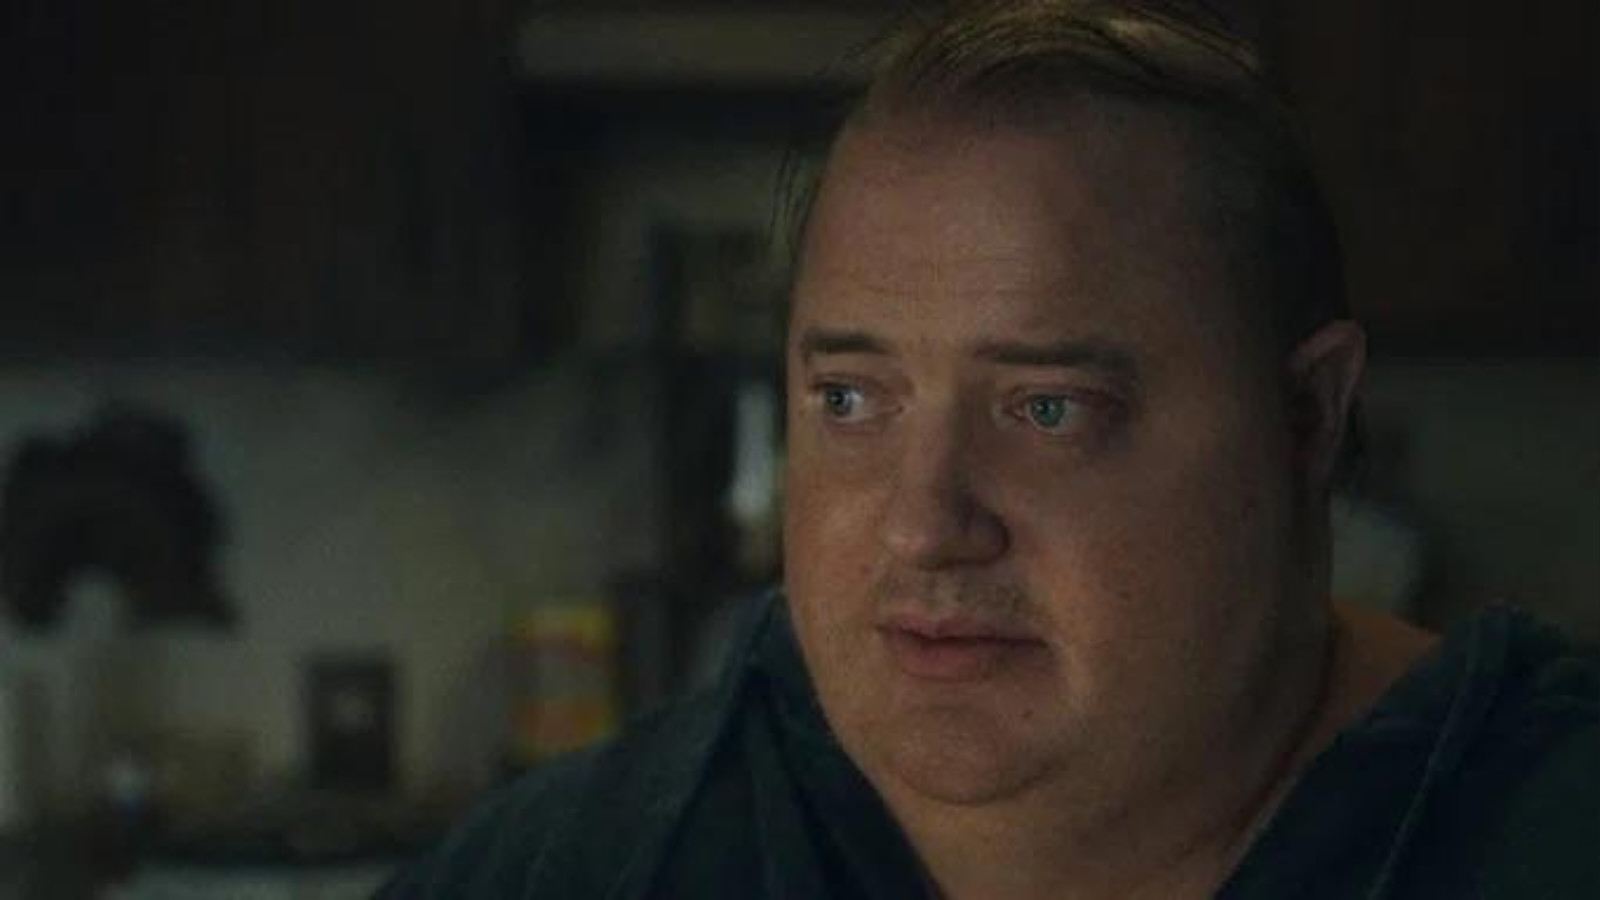 Brendan Fraser had to put on prosthetics to play the role of an obese man